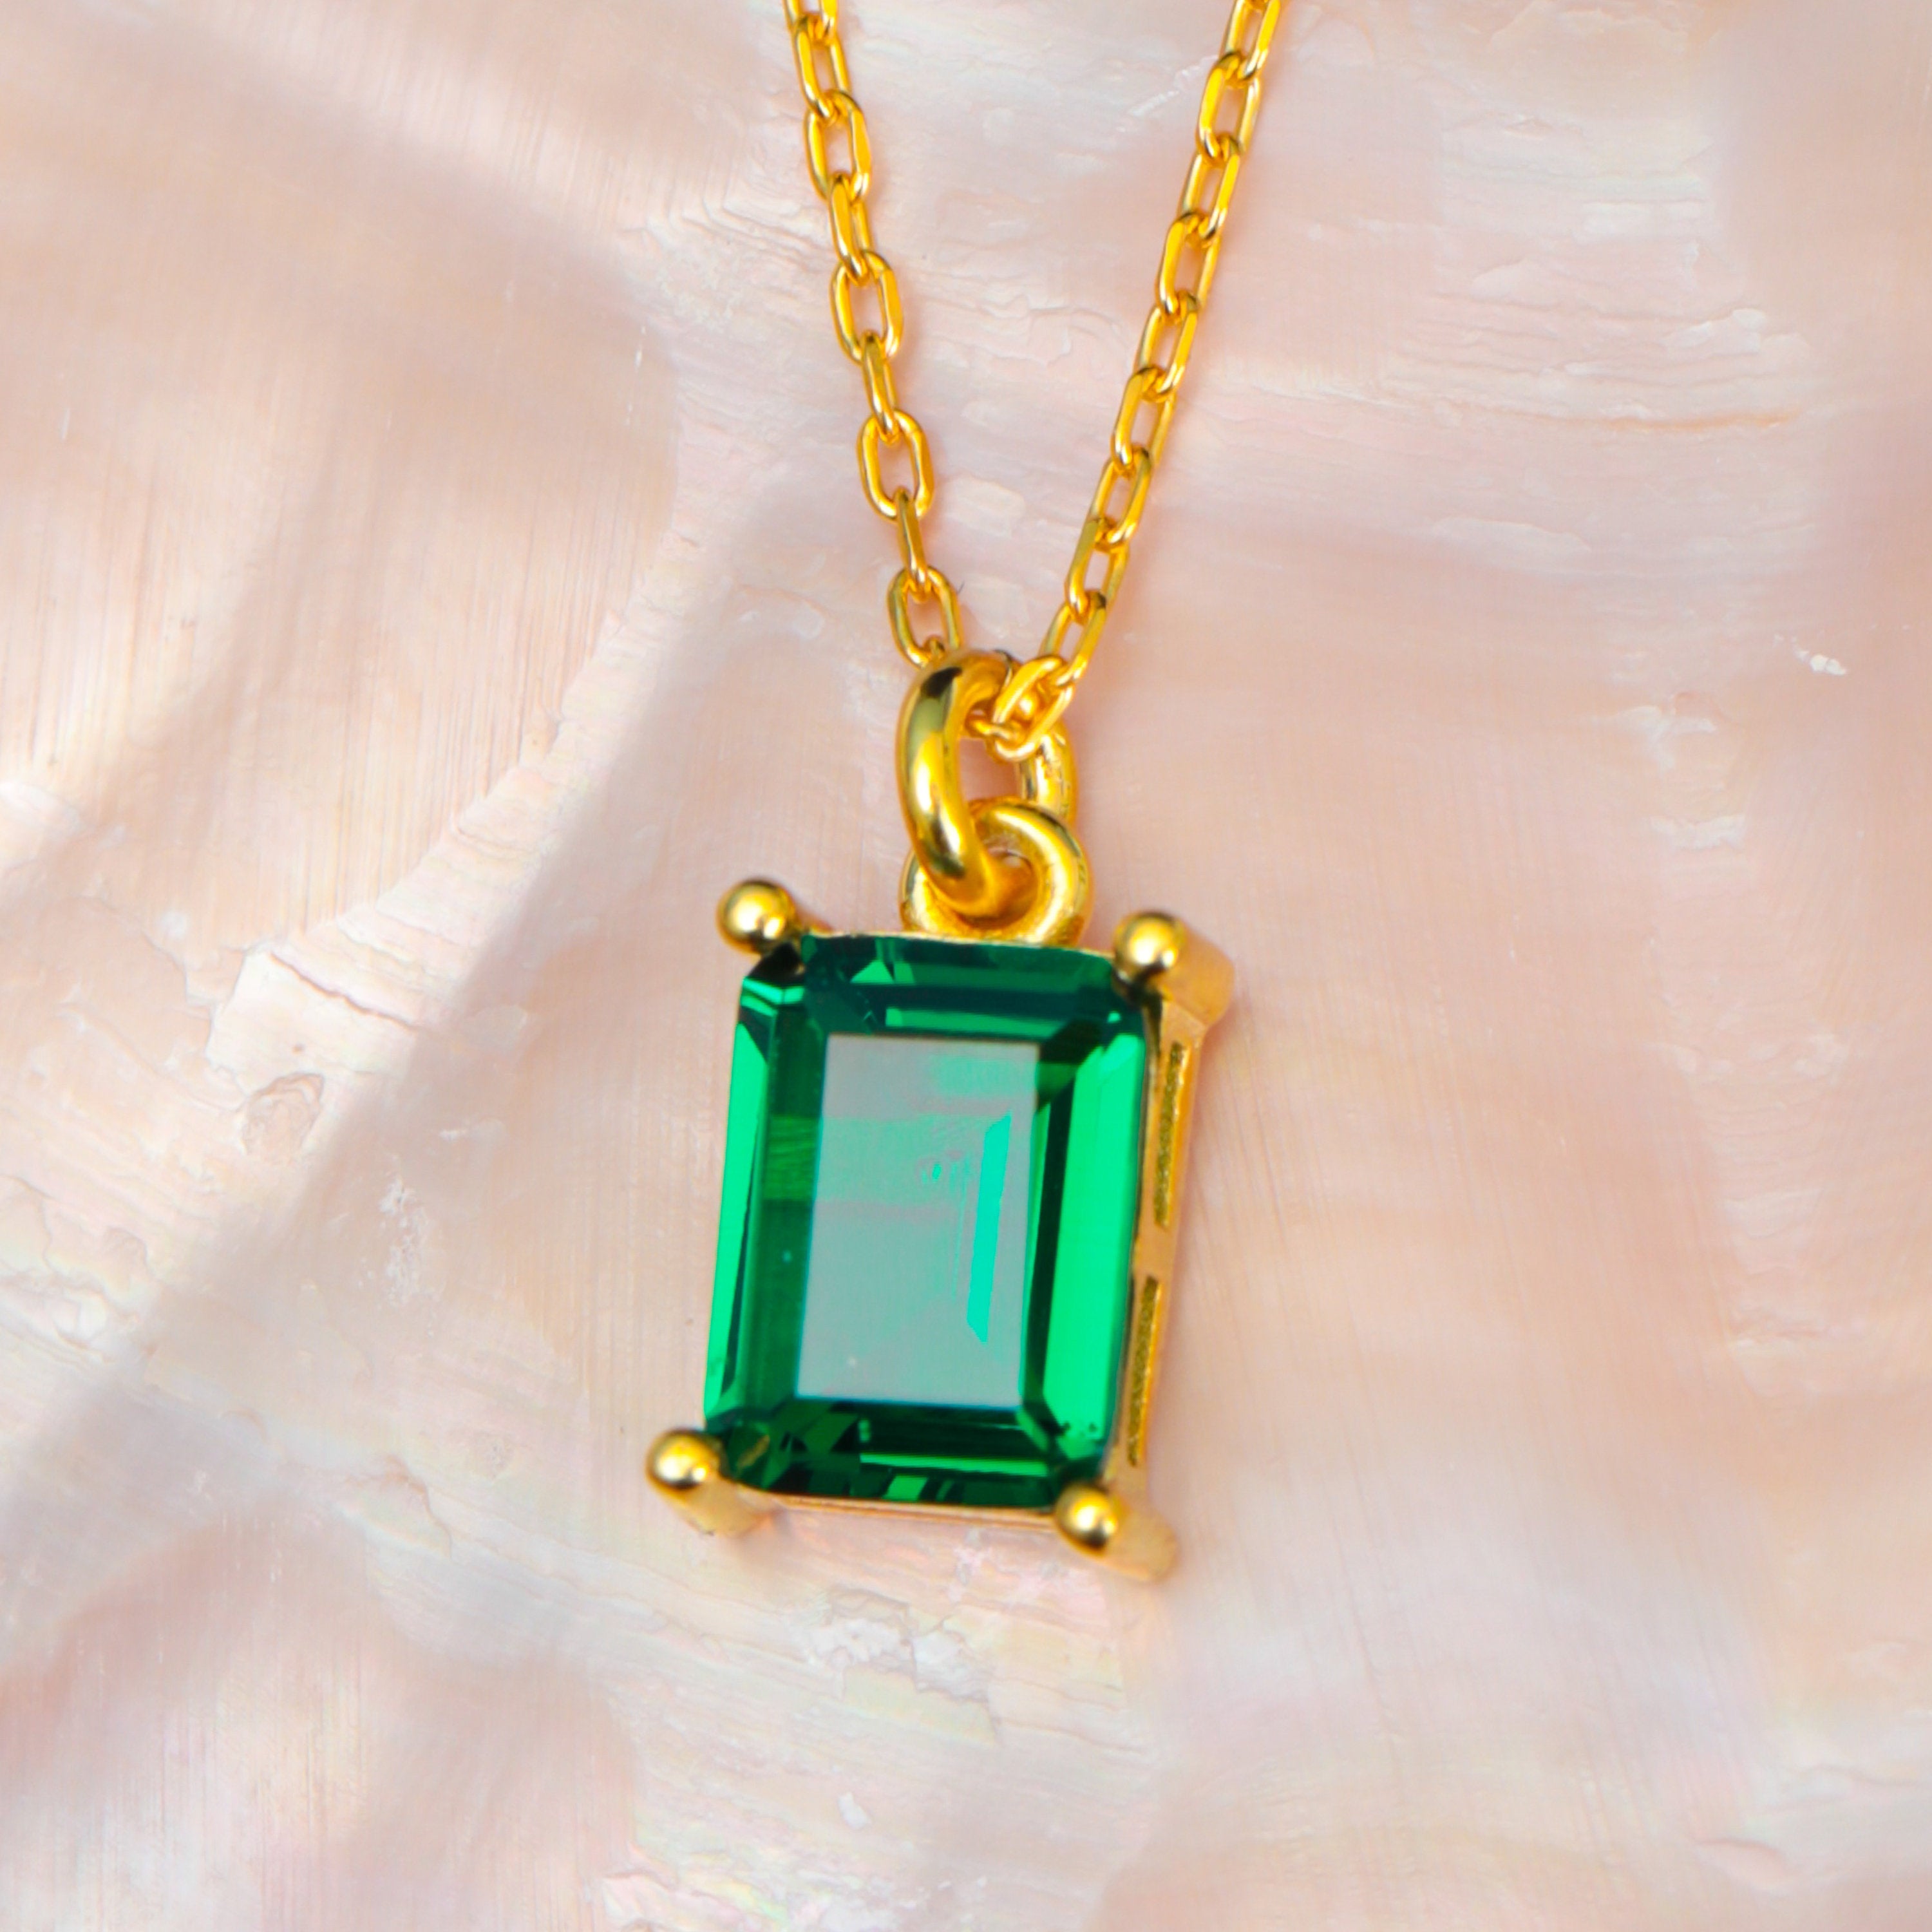 Emeralds Square Pendant Sterling Silver Necklace - DANG0015. Free Shipping,  Easy 30 Days Returns and Exchange, 6 Month Plating Warranty.